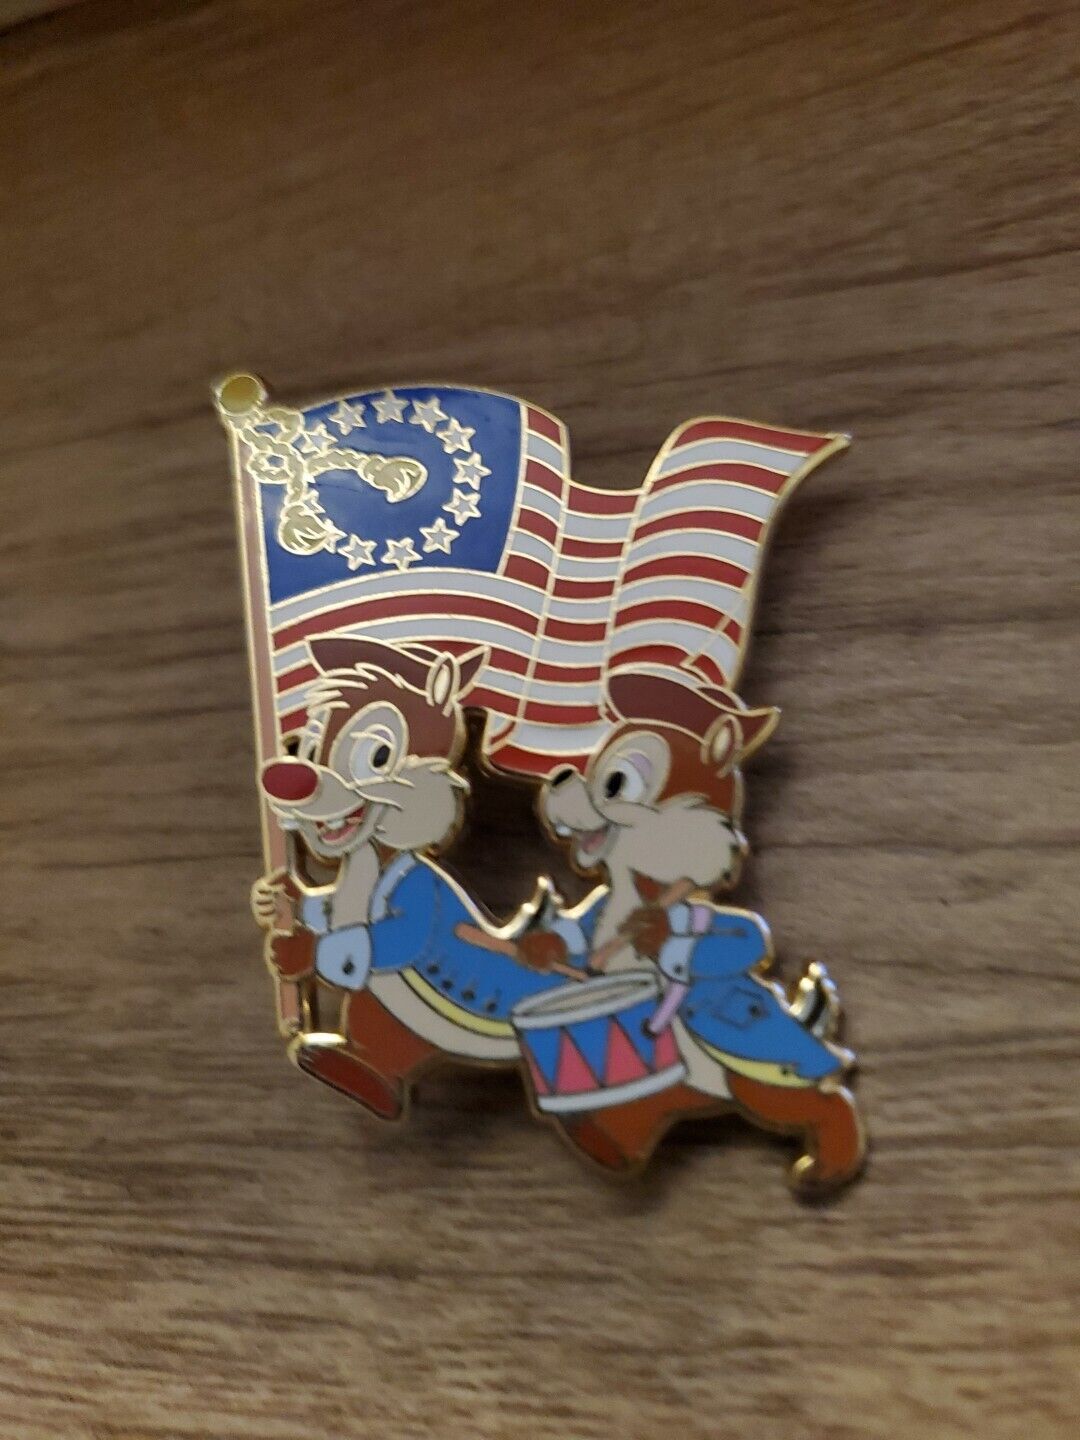 Disney Pin 2008Shopping.com COLONIAL CHIP & DALE DRUM American Flag 4th of July 